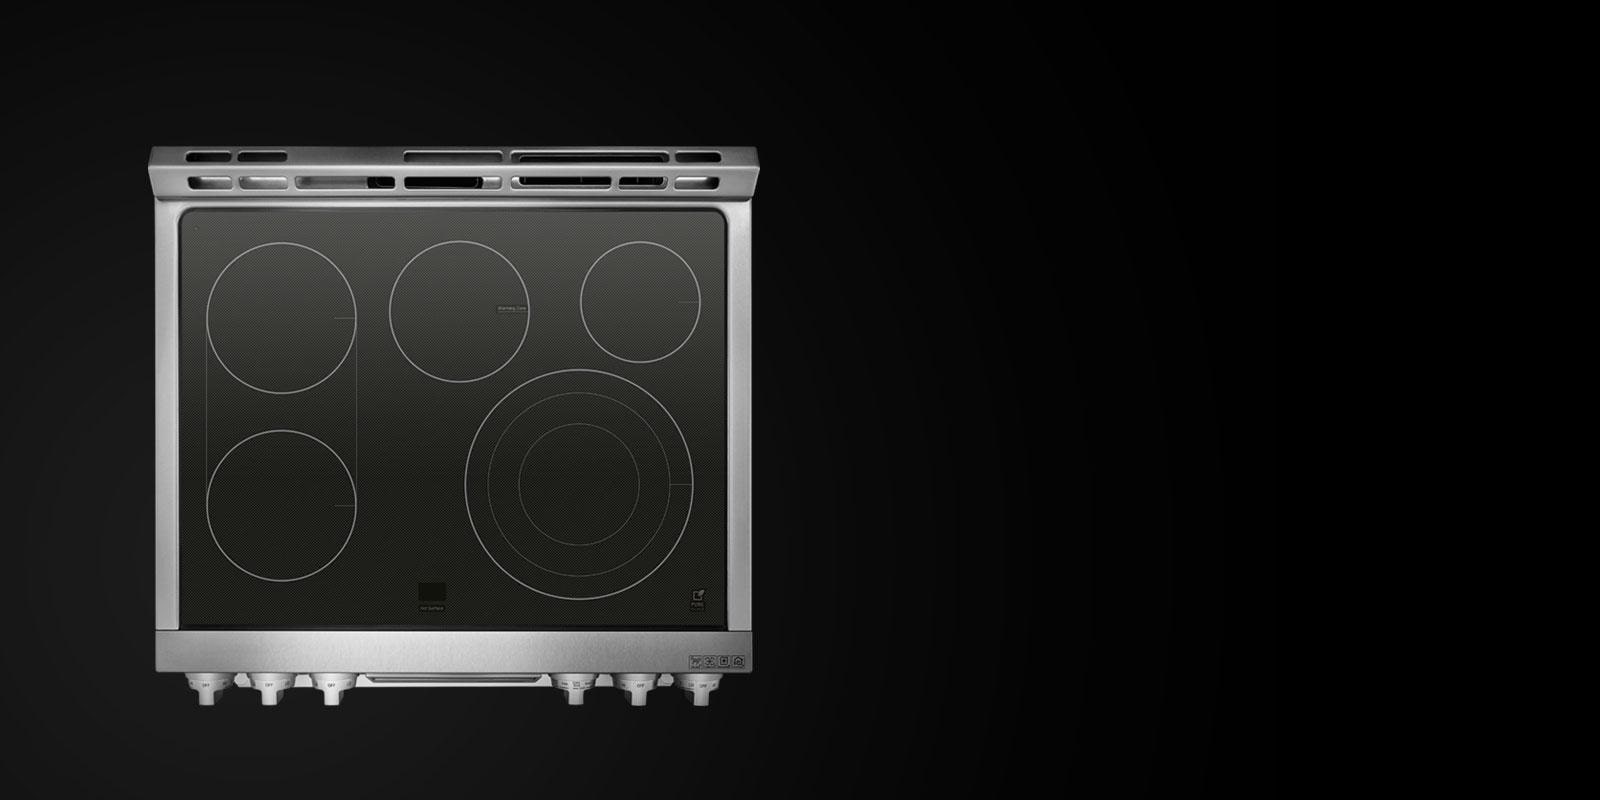 LG's Fastest Boiling Cooktop Elements1